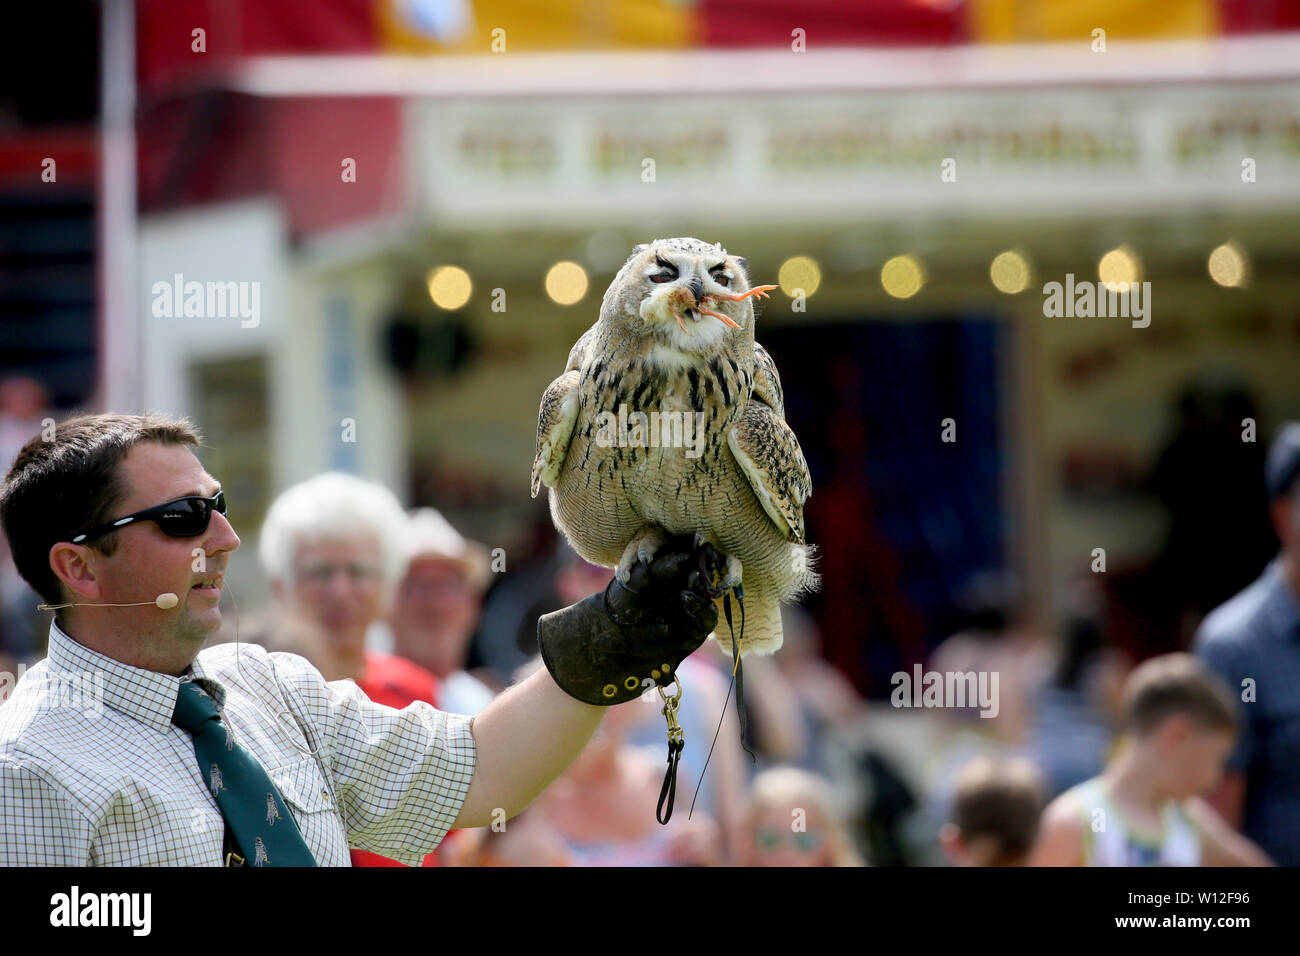 Todmorden, Yorkshire, UK. 29th June, 2019. Bird of prey display at Todmorden Game and Country Fair. Todmorden. Credit: Barbara Cook/Alamy Live News Stock Photo